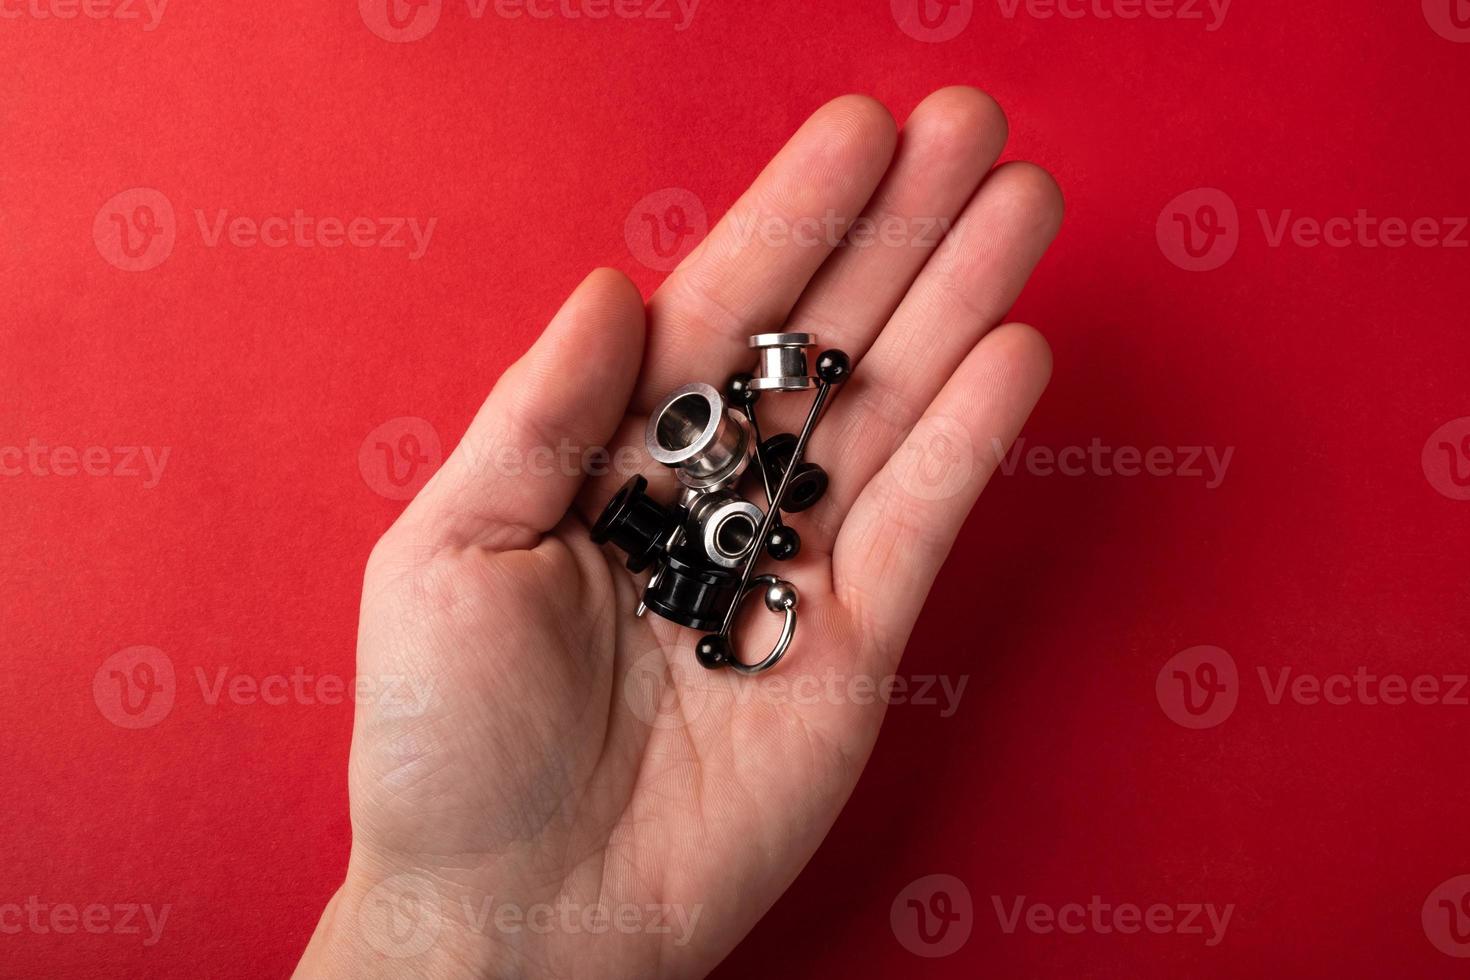 Piercing and jewelry for the ears in the palm of the hand on a red background photo